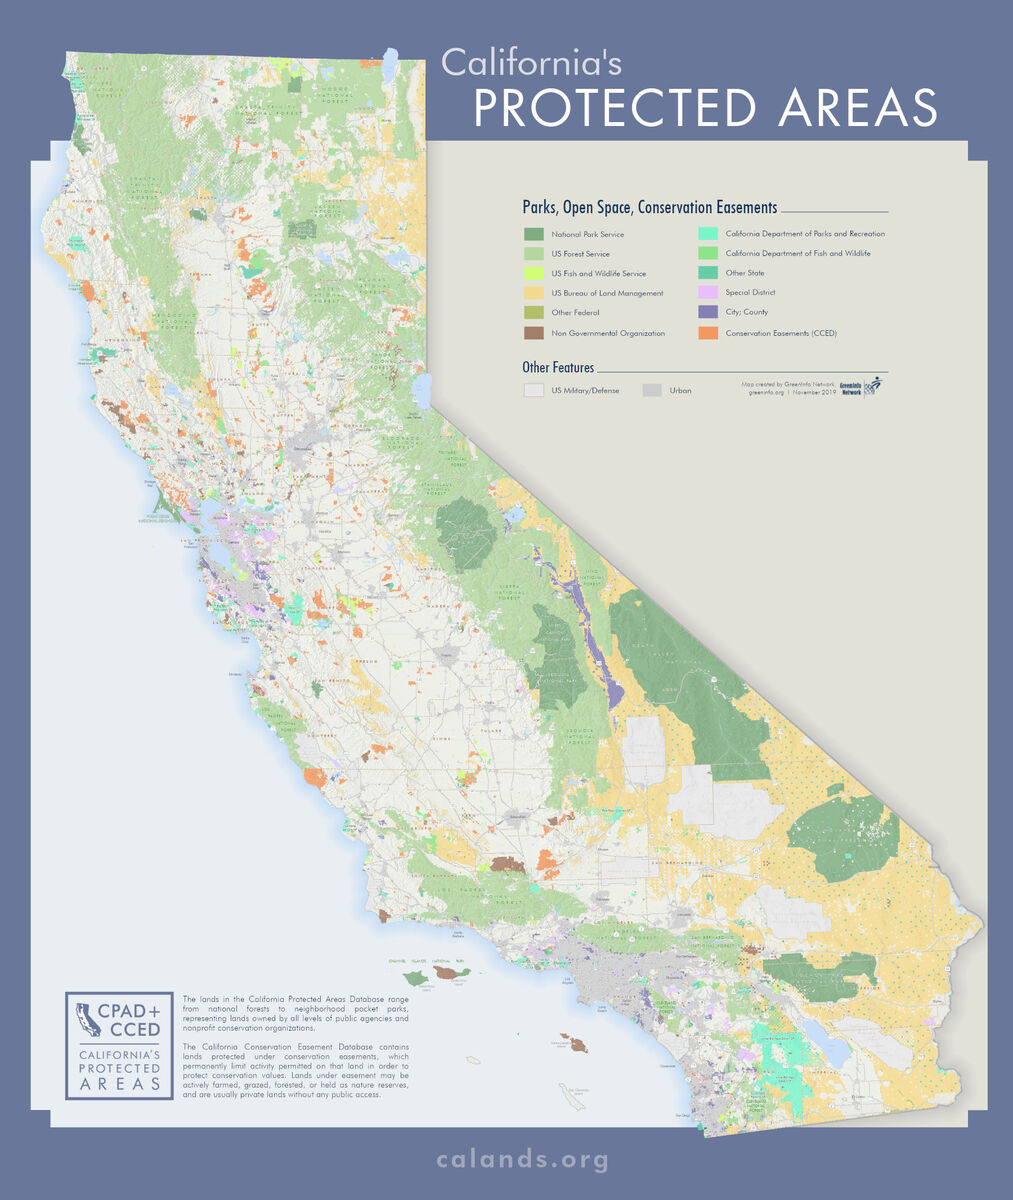 Map of California with different color areas showing Parks, Open Space and Conservation Easements